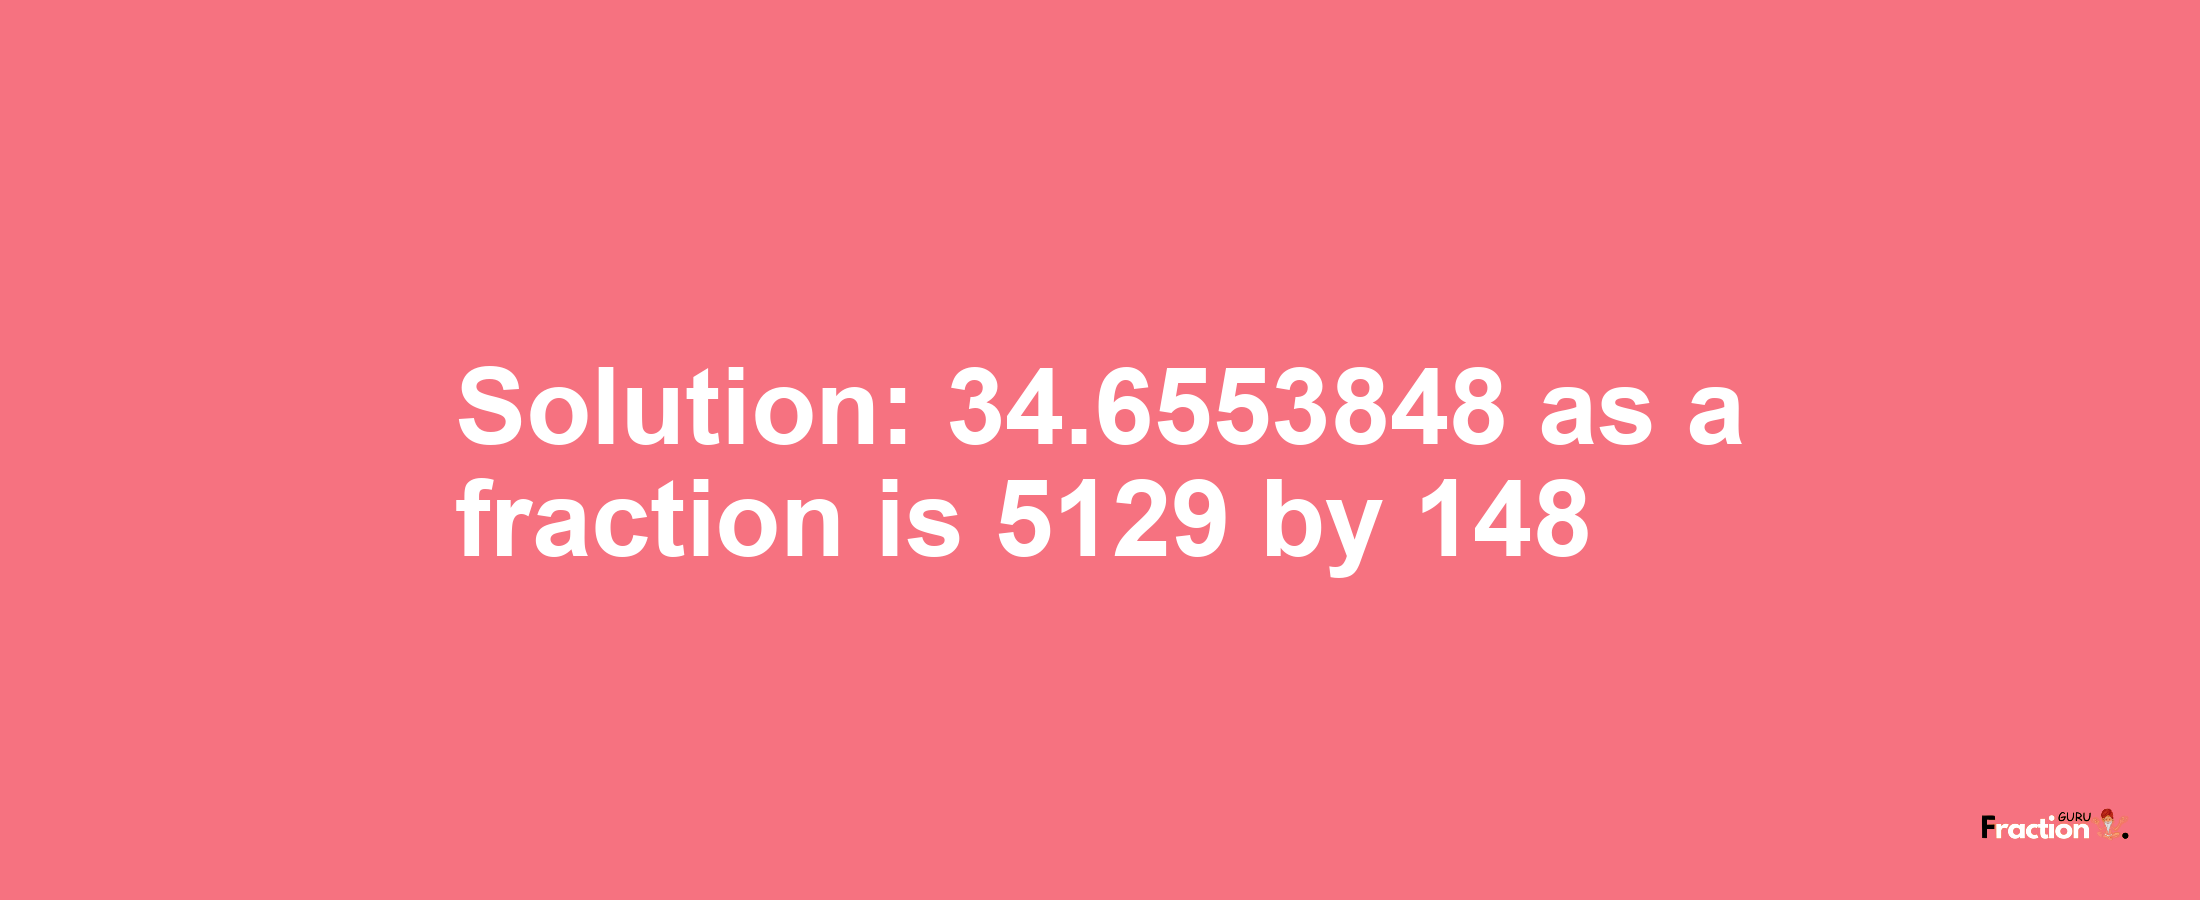 Solution:34.6553848 as a fraction is 5129/148